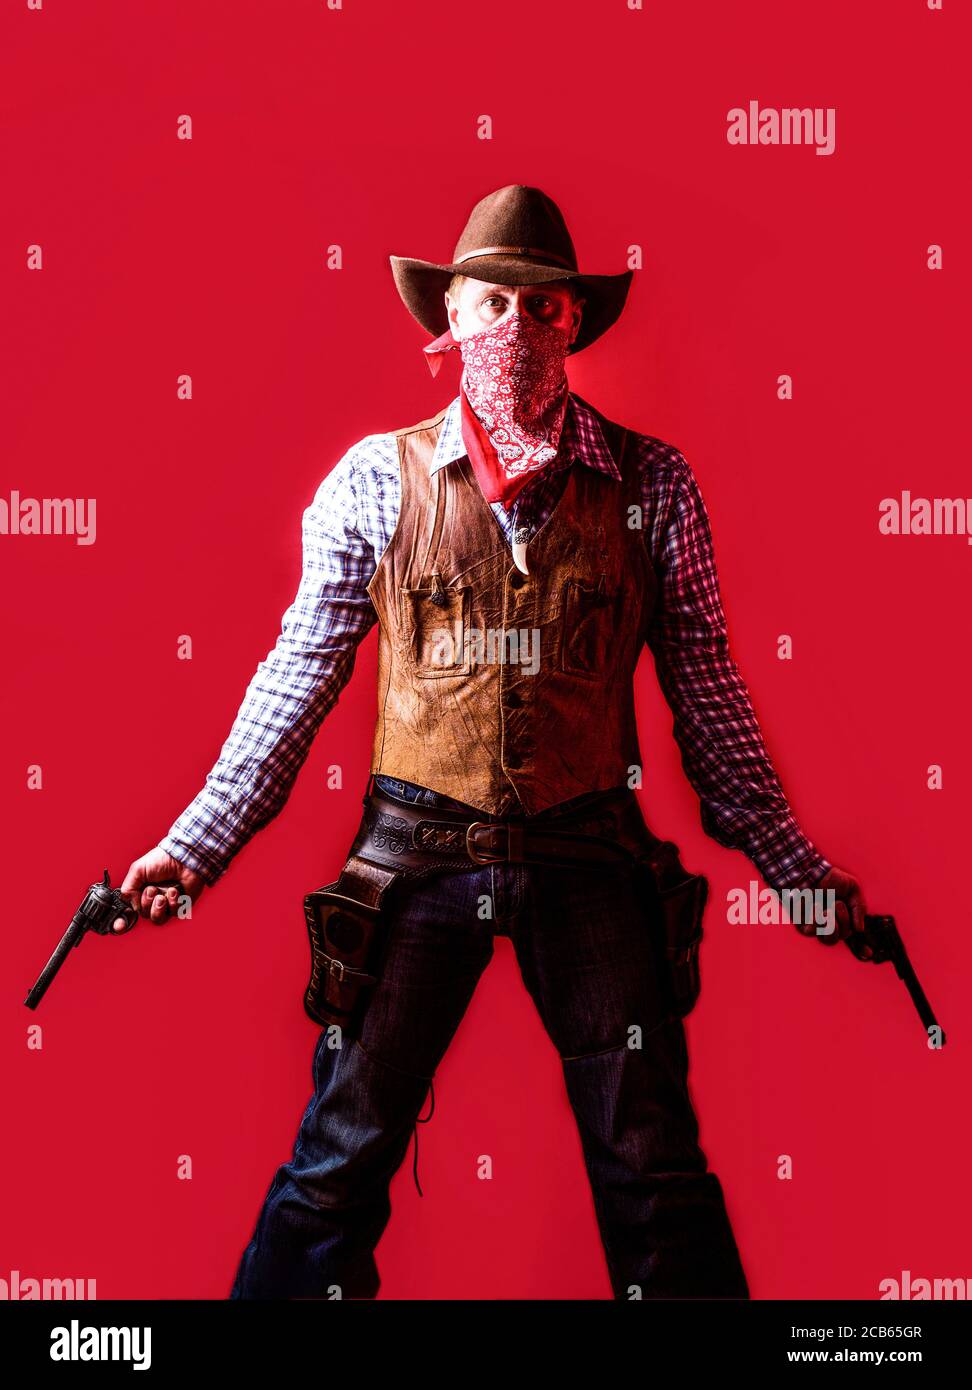 American bandit in mask, western man with hat. Man wearing cowboy hat, gun.  West, guns. Portrait of a cowboy. owboy with weapon on red background Stock  Photo - Alamy